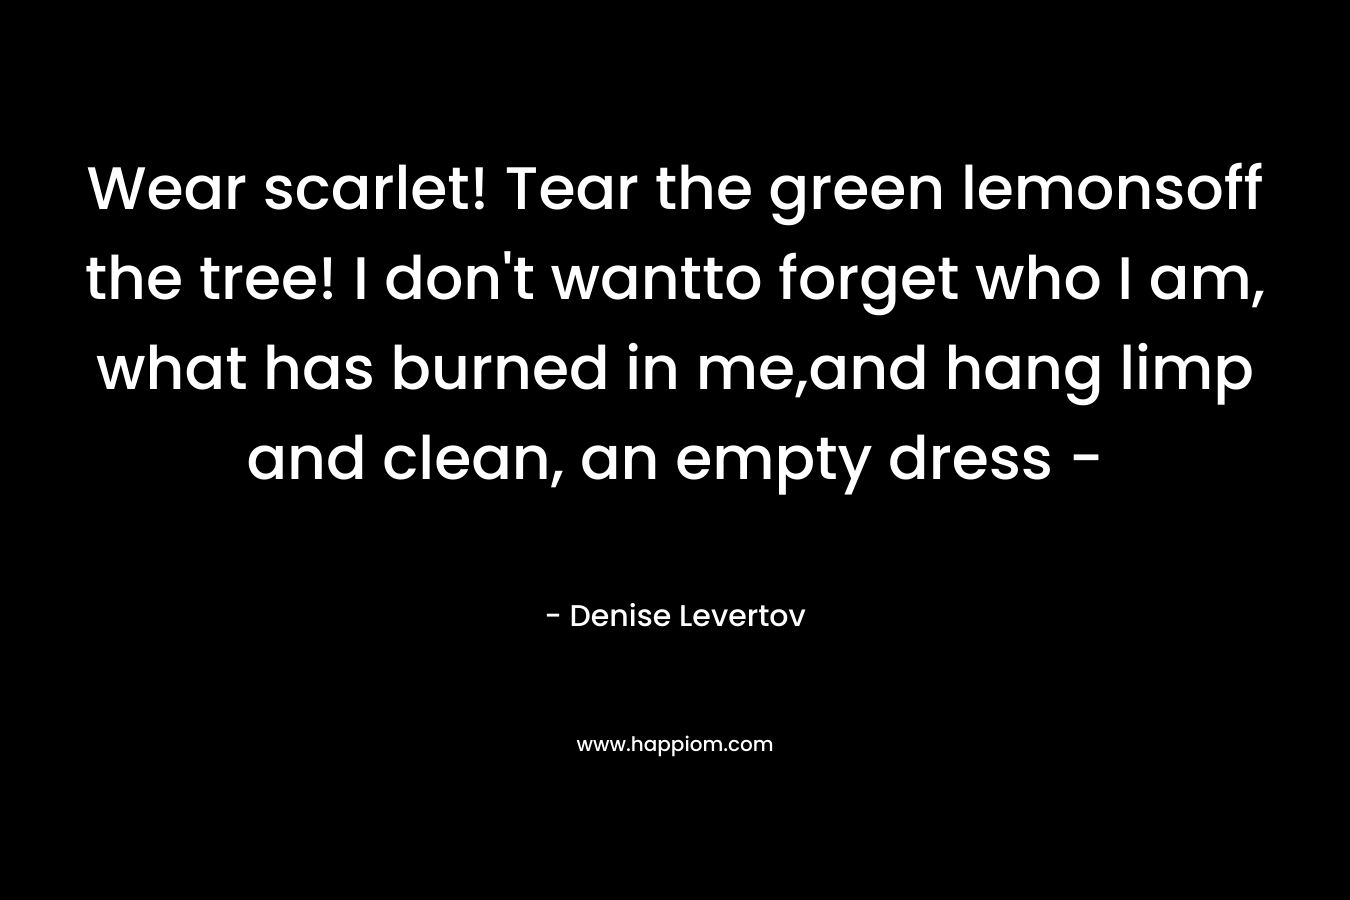 Wear scarlet! Tear the green lemonsoff the tree! I don’t wantto forget who I am, what has burned in me,and hang limp and clean, an empty dress – – Denise Levertov